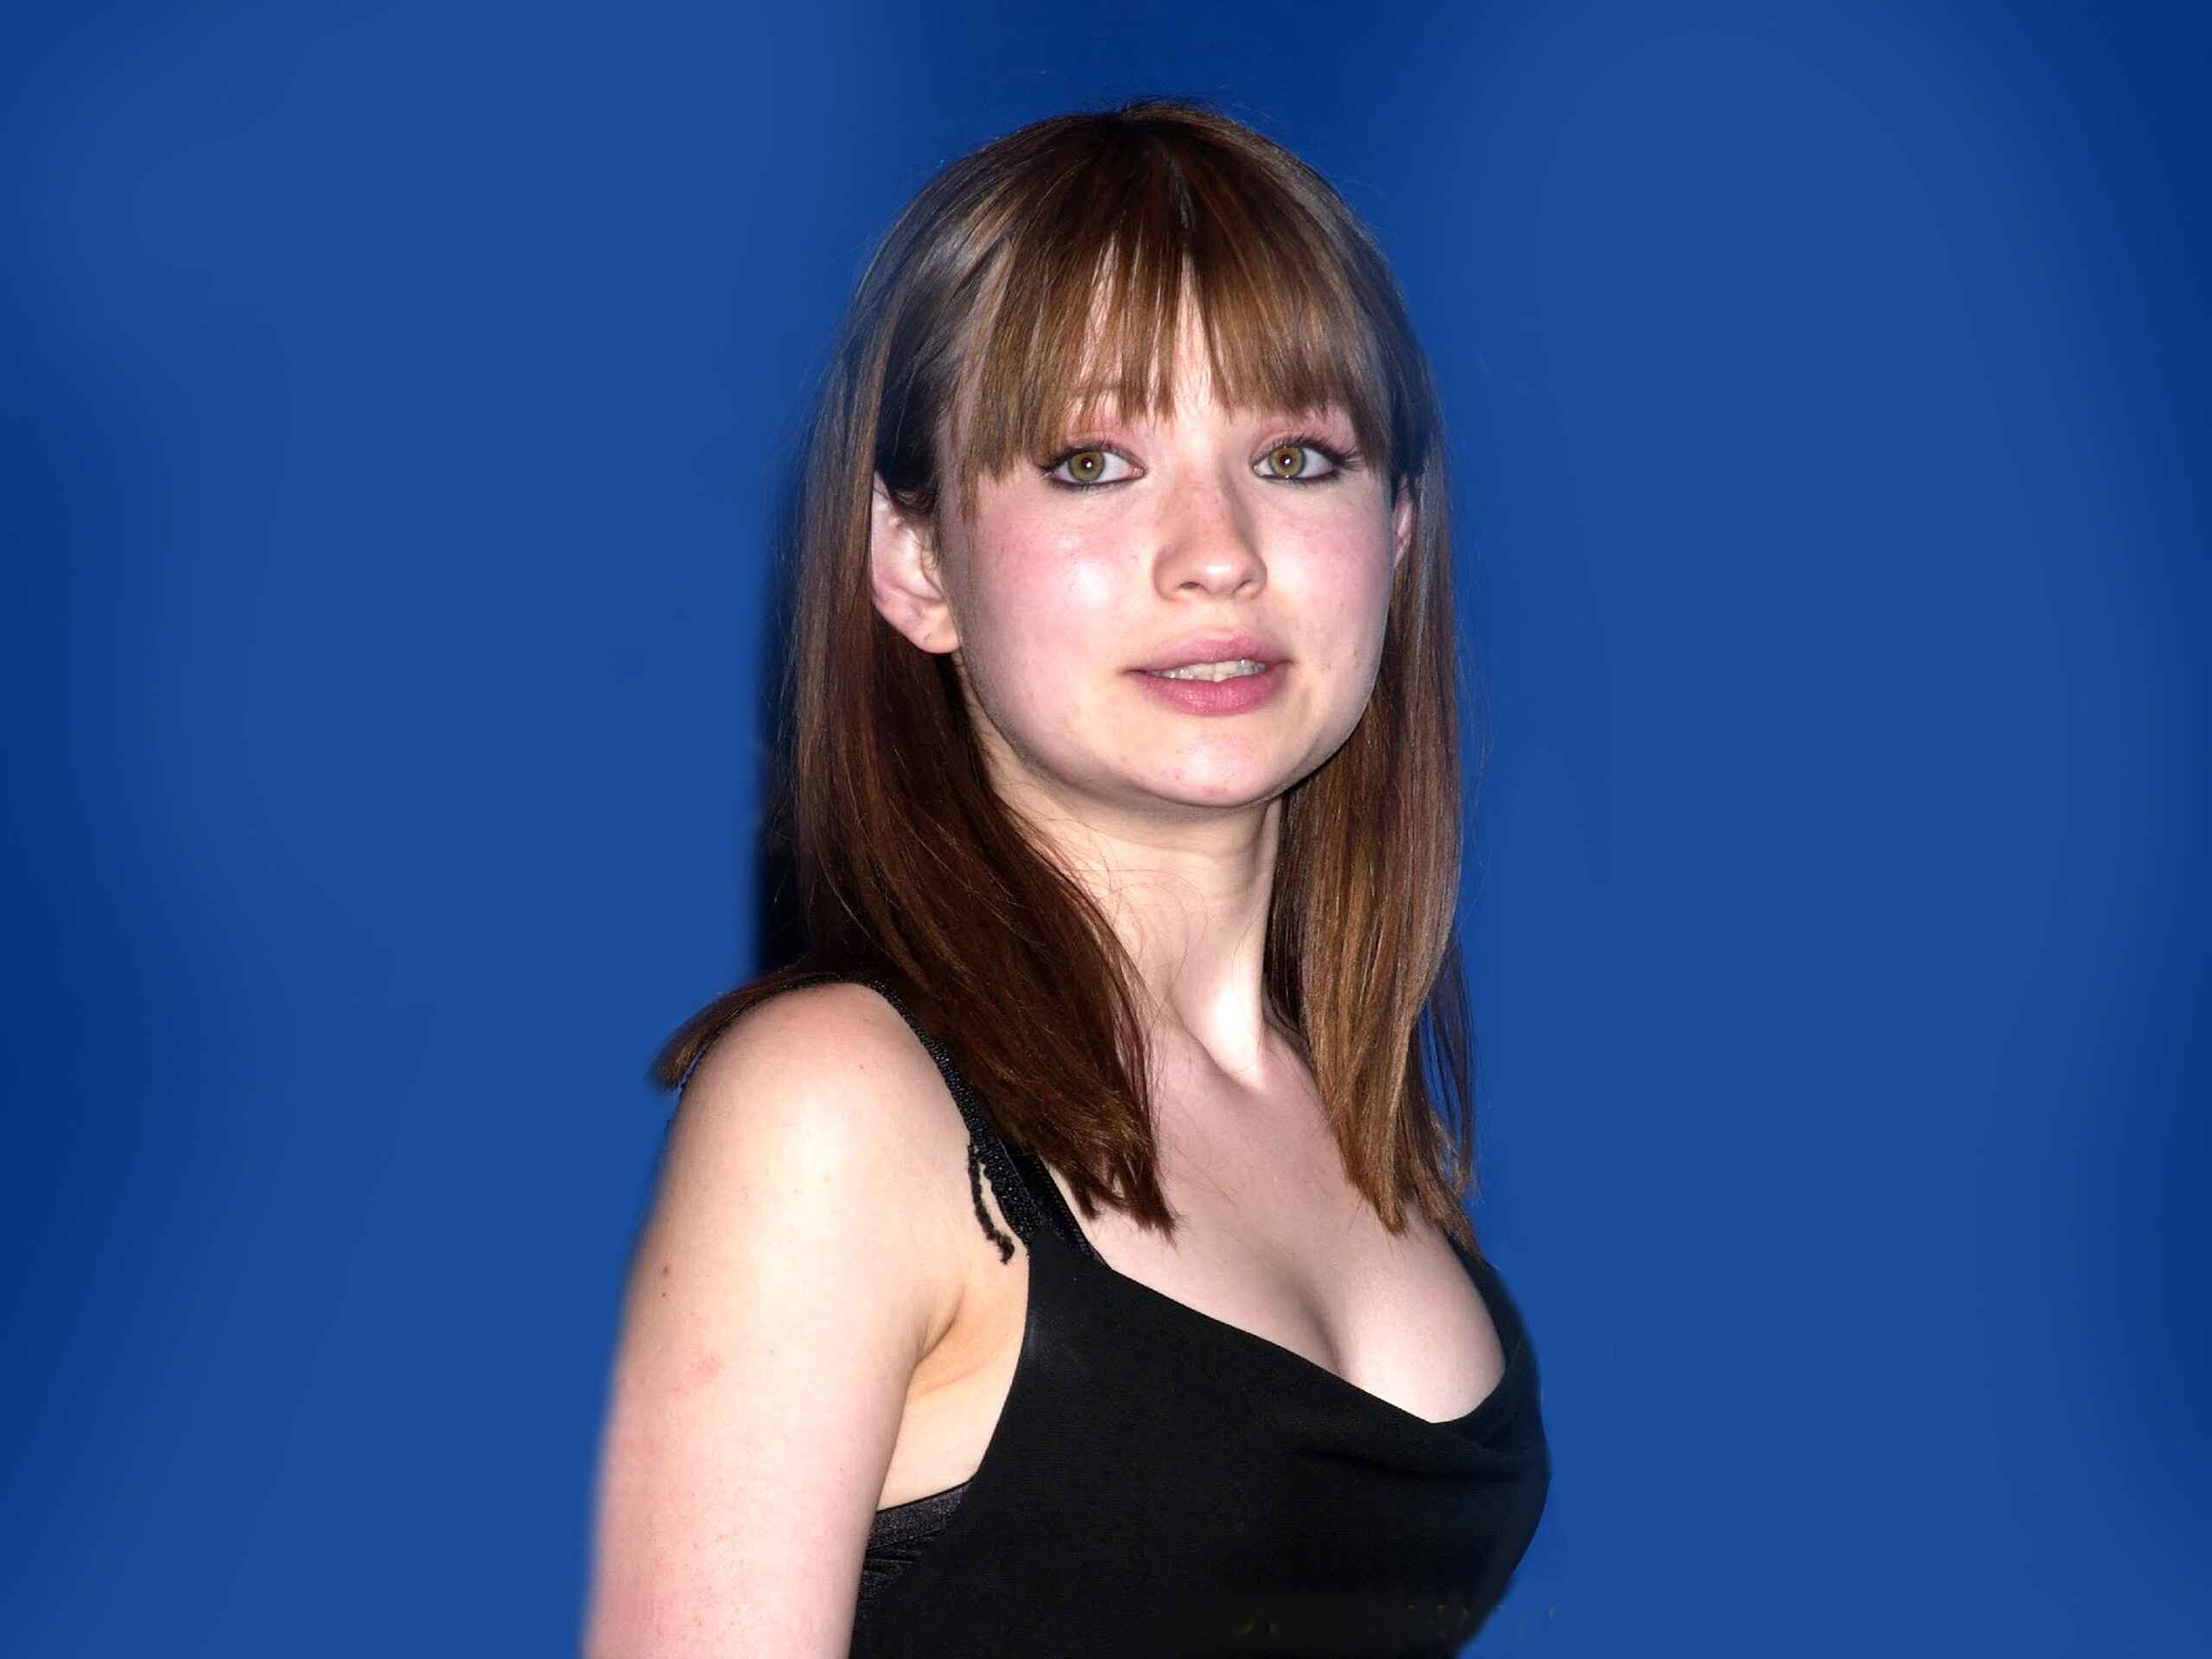 emily-browning-the-talented-actress-behind-violet-baudelaire-in-a-series-of-unfortunate-events